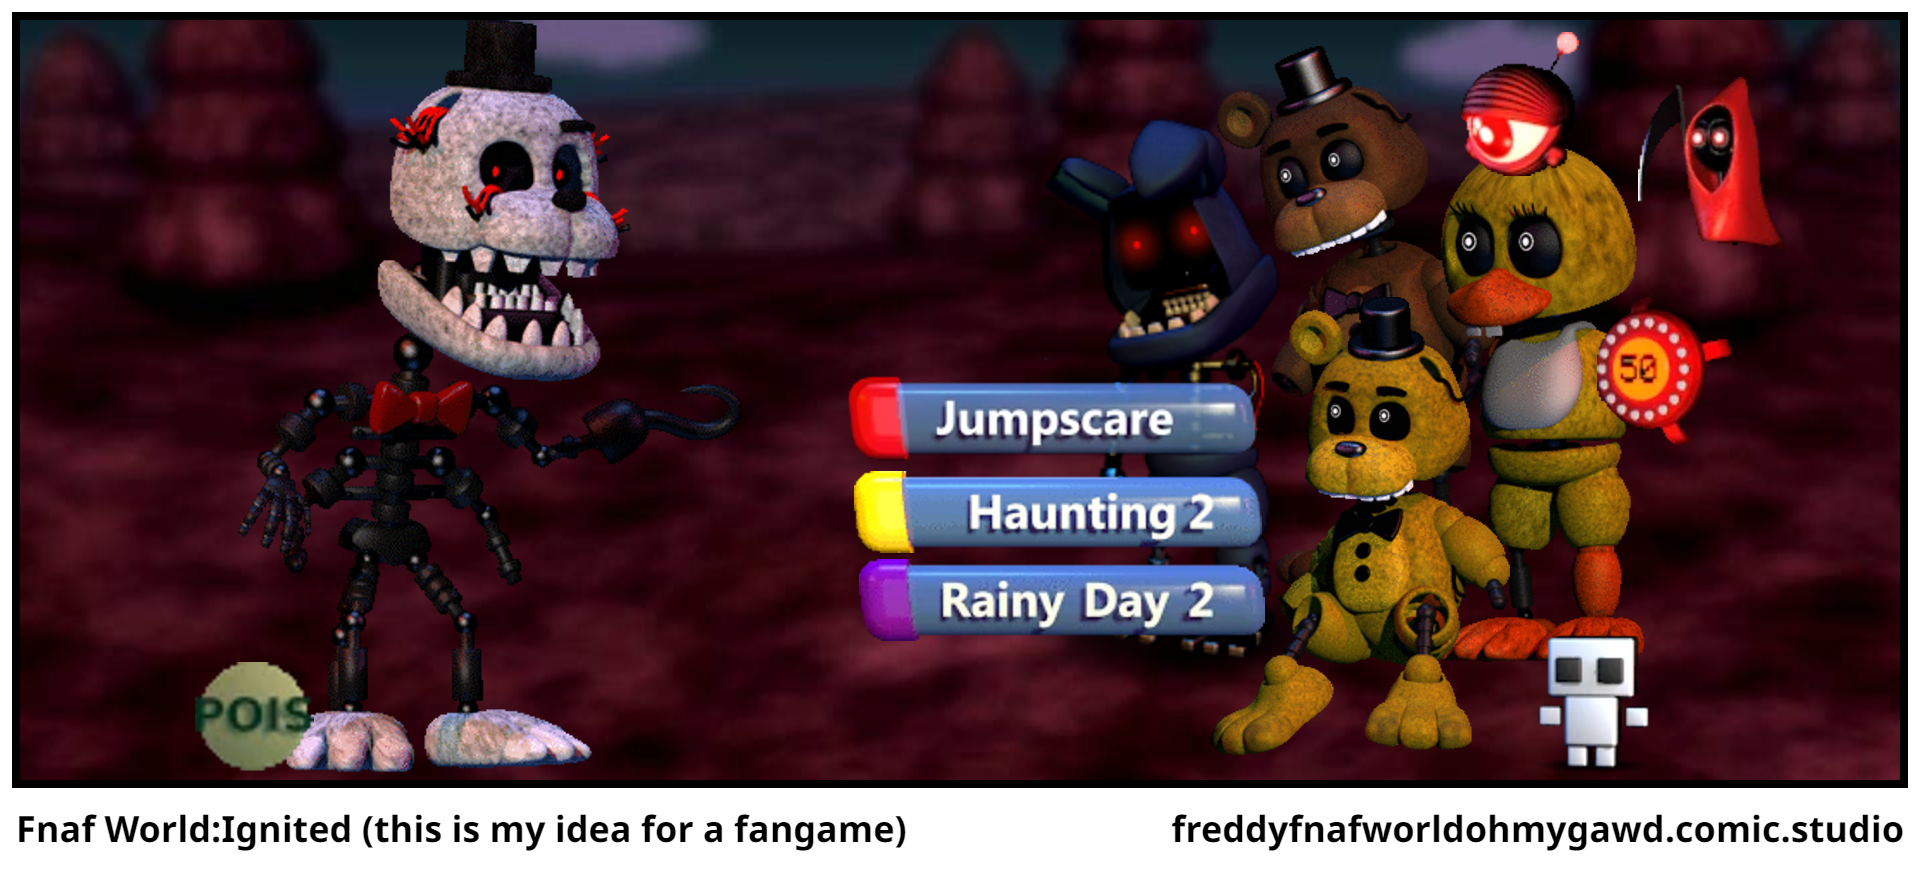 Fnaf World:Ignited (this is my idea for a fangame)